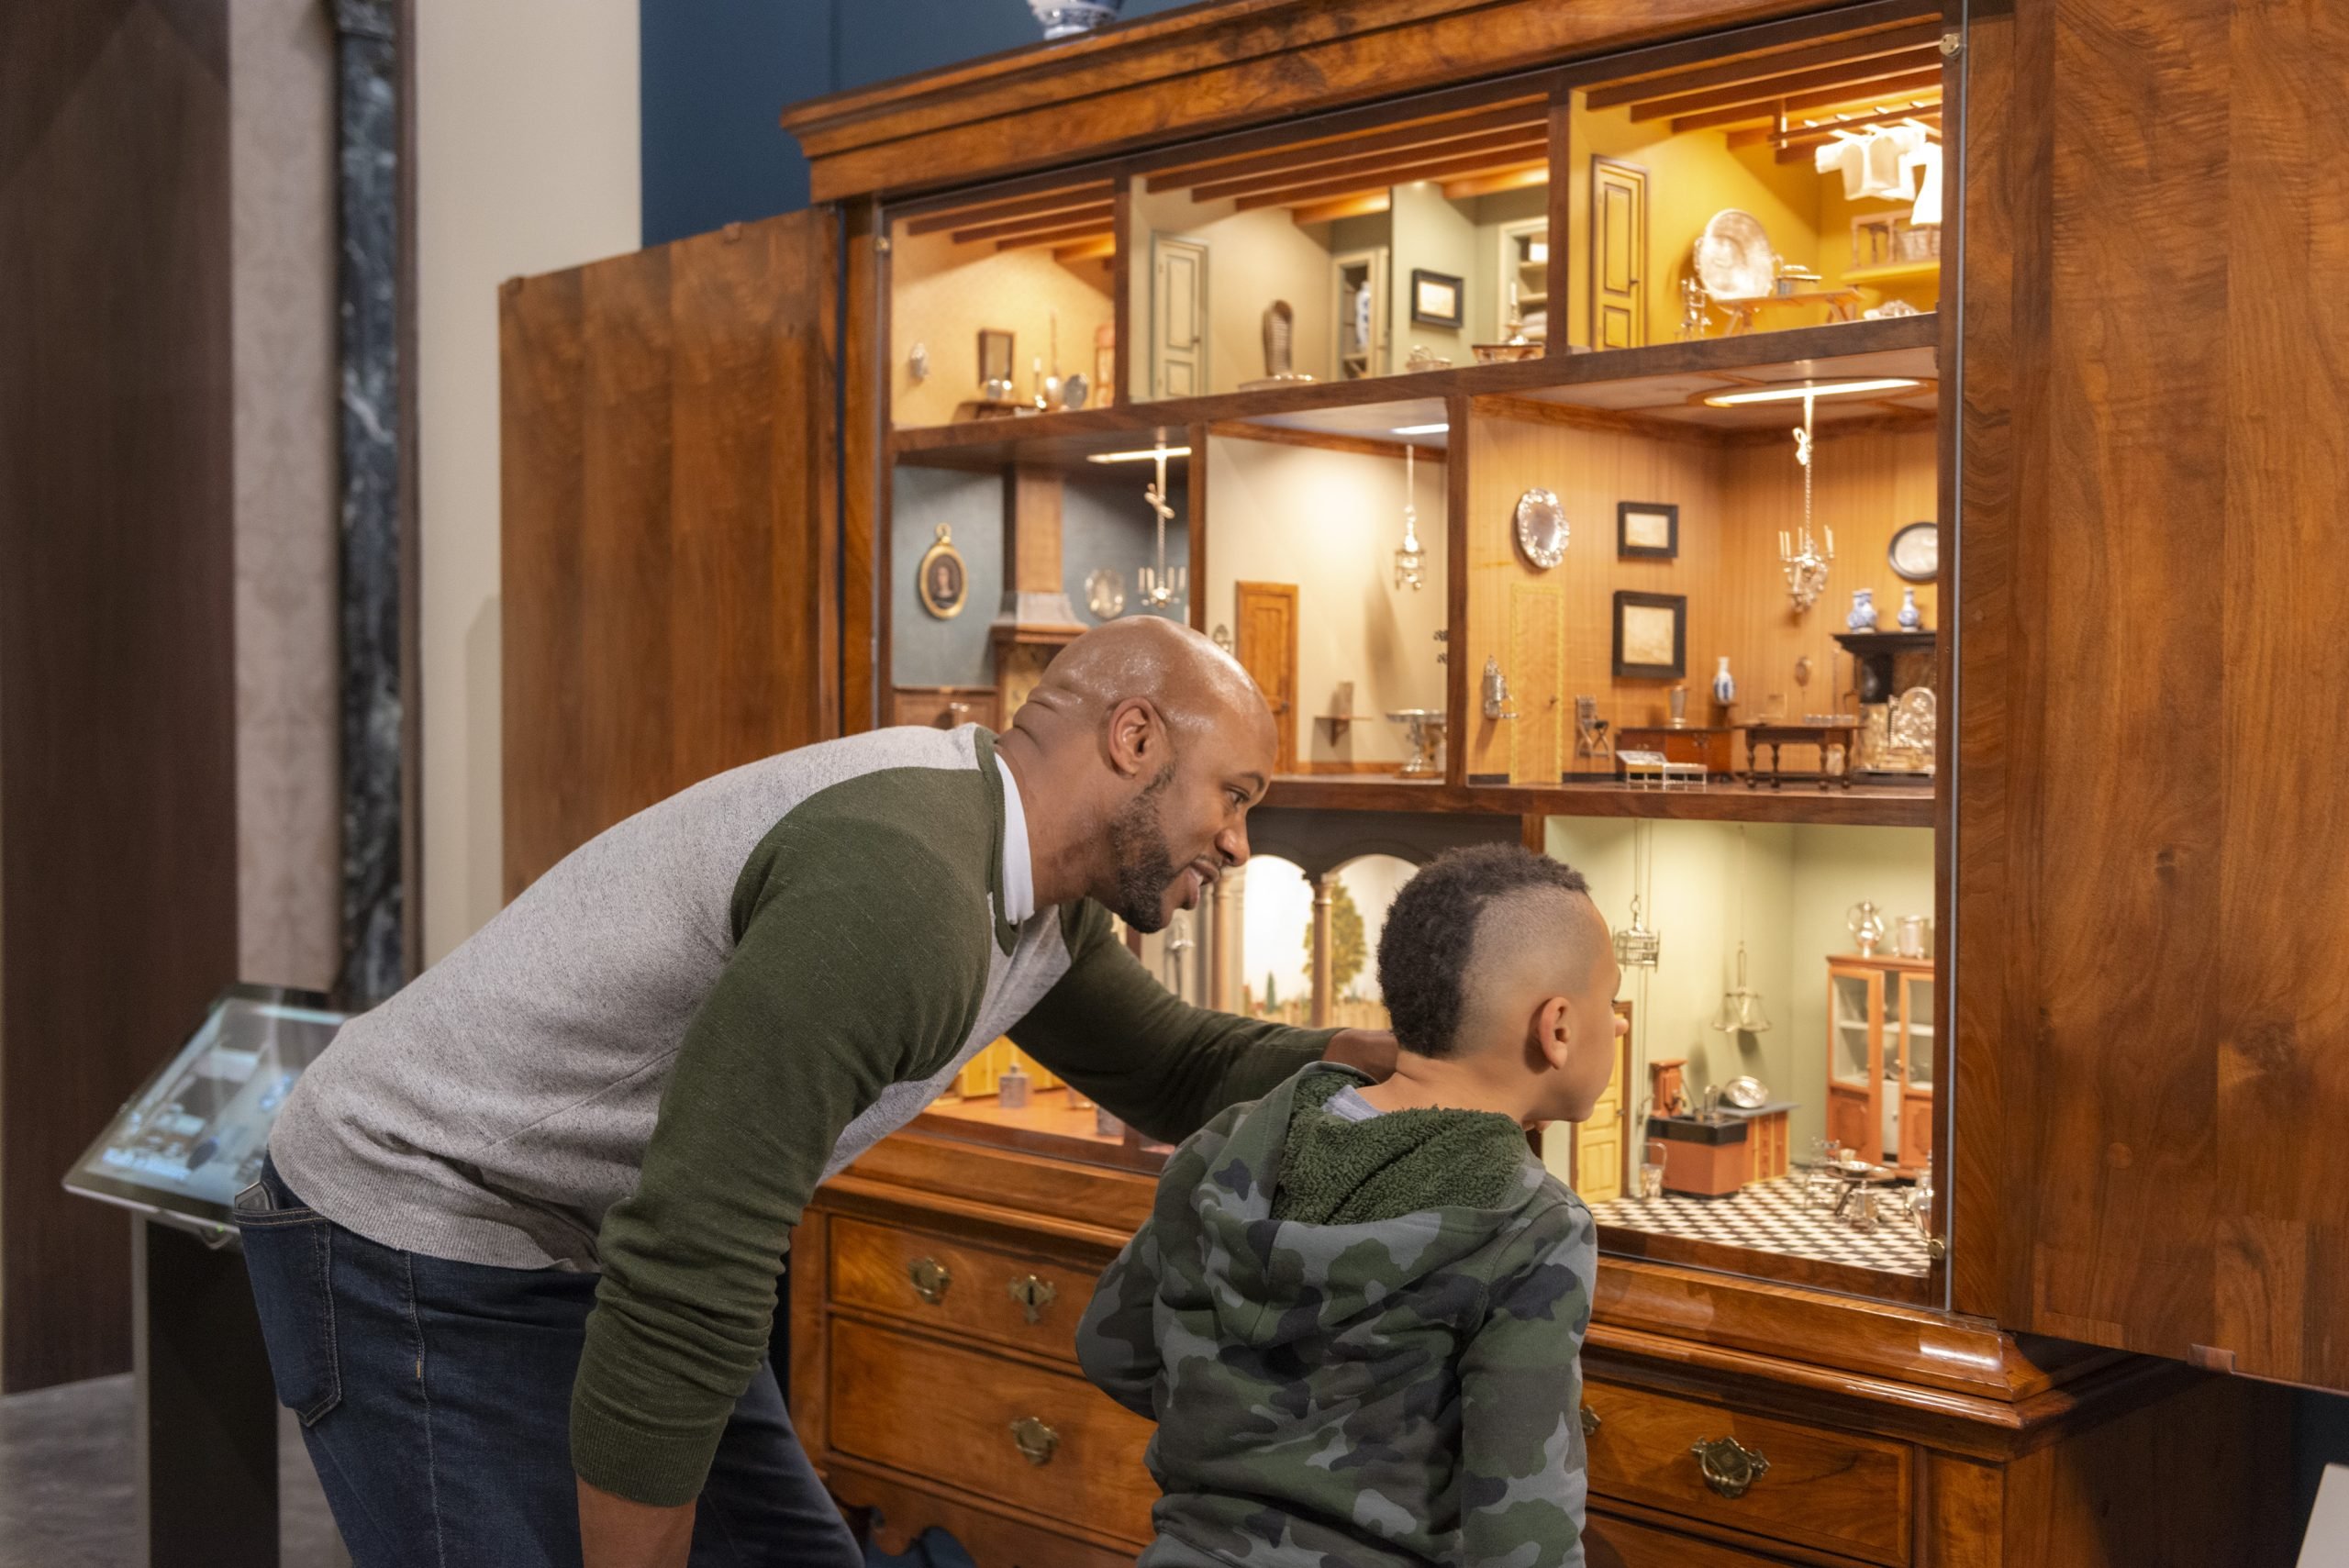 parent and child at the Dutch galleries at the MFA in Boston (visiting Boston art museums with kids, photo credit Museum of Fine Arts, Boston)